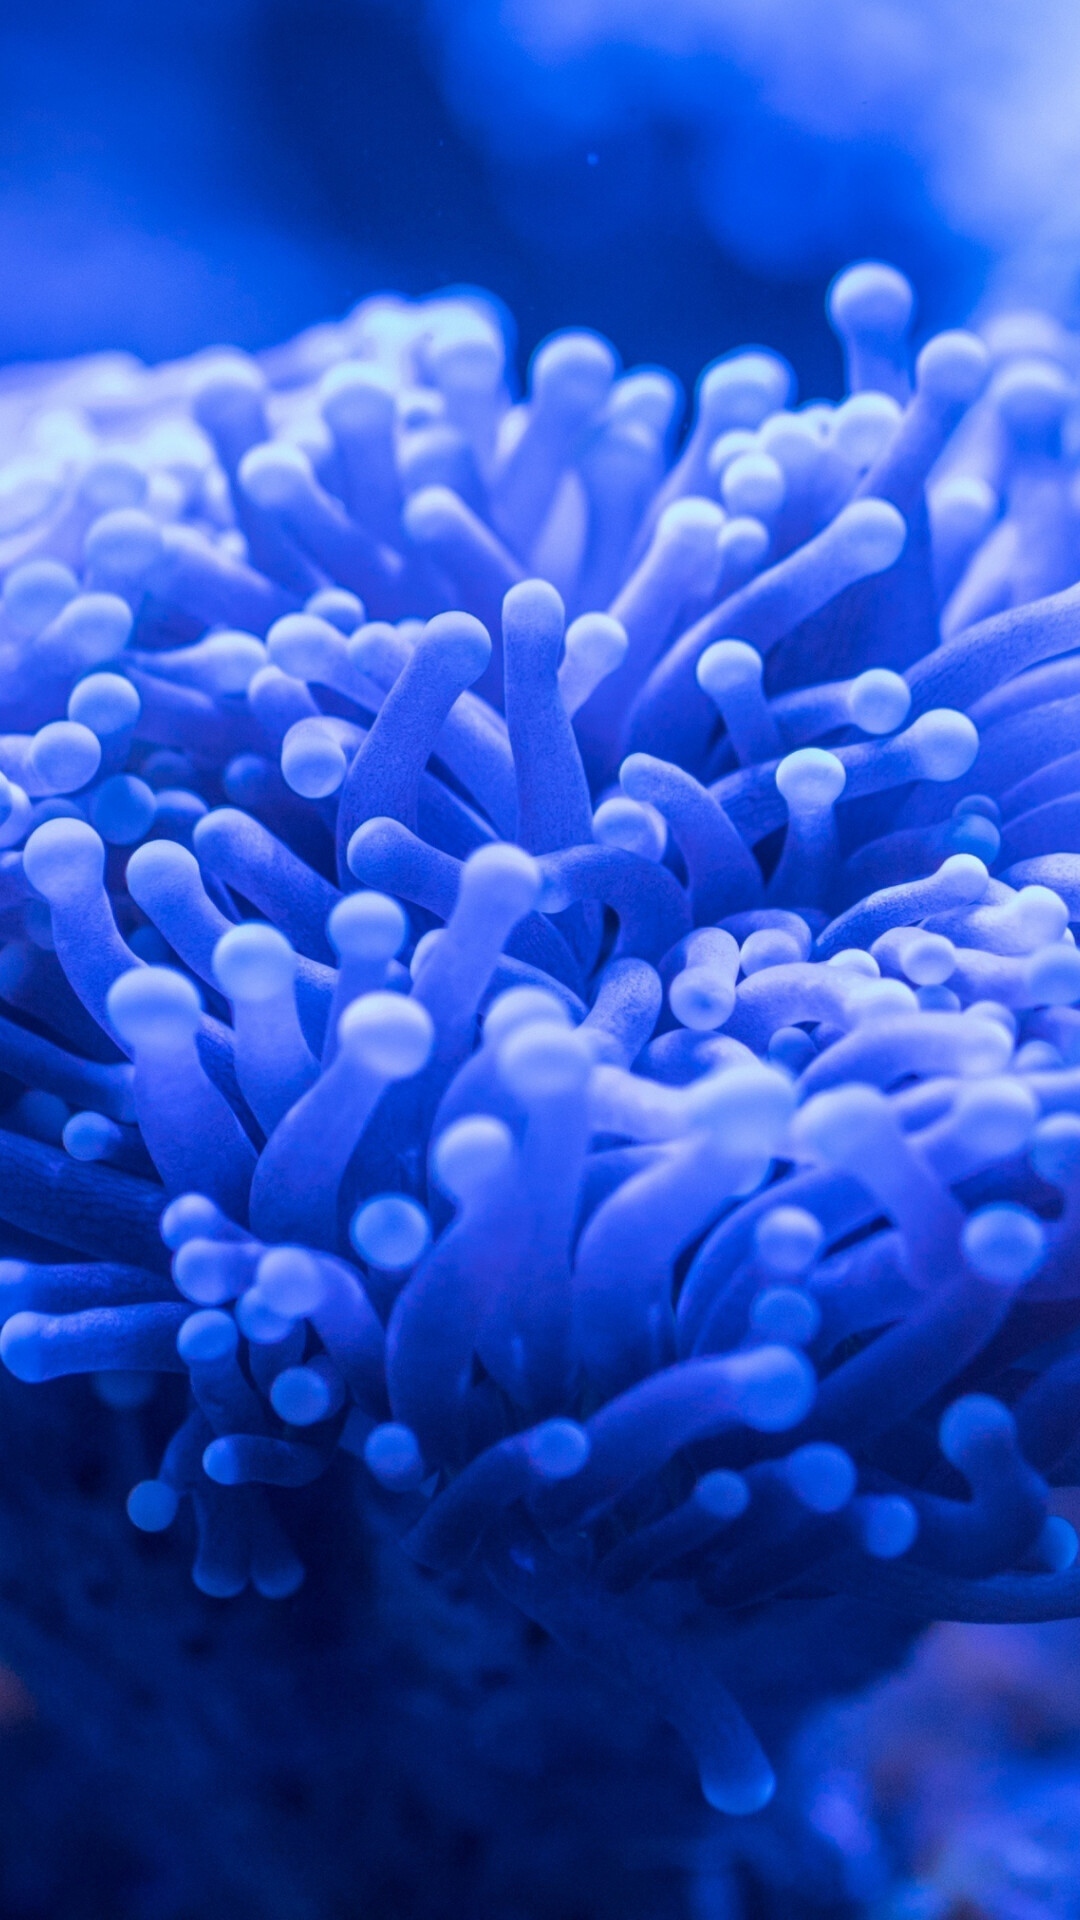 Coral Reef: Made up of colonies of hundreds to thousands of tiny individual corals called polyps. 1080x1920 Full HD Wallpaper.